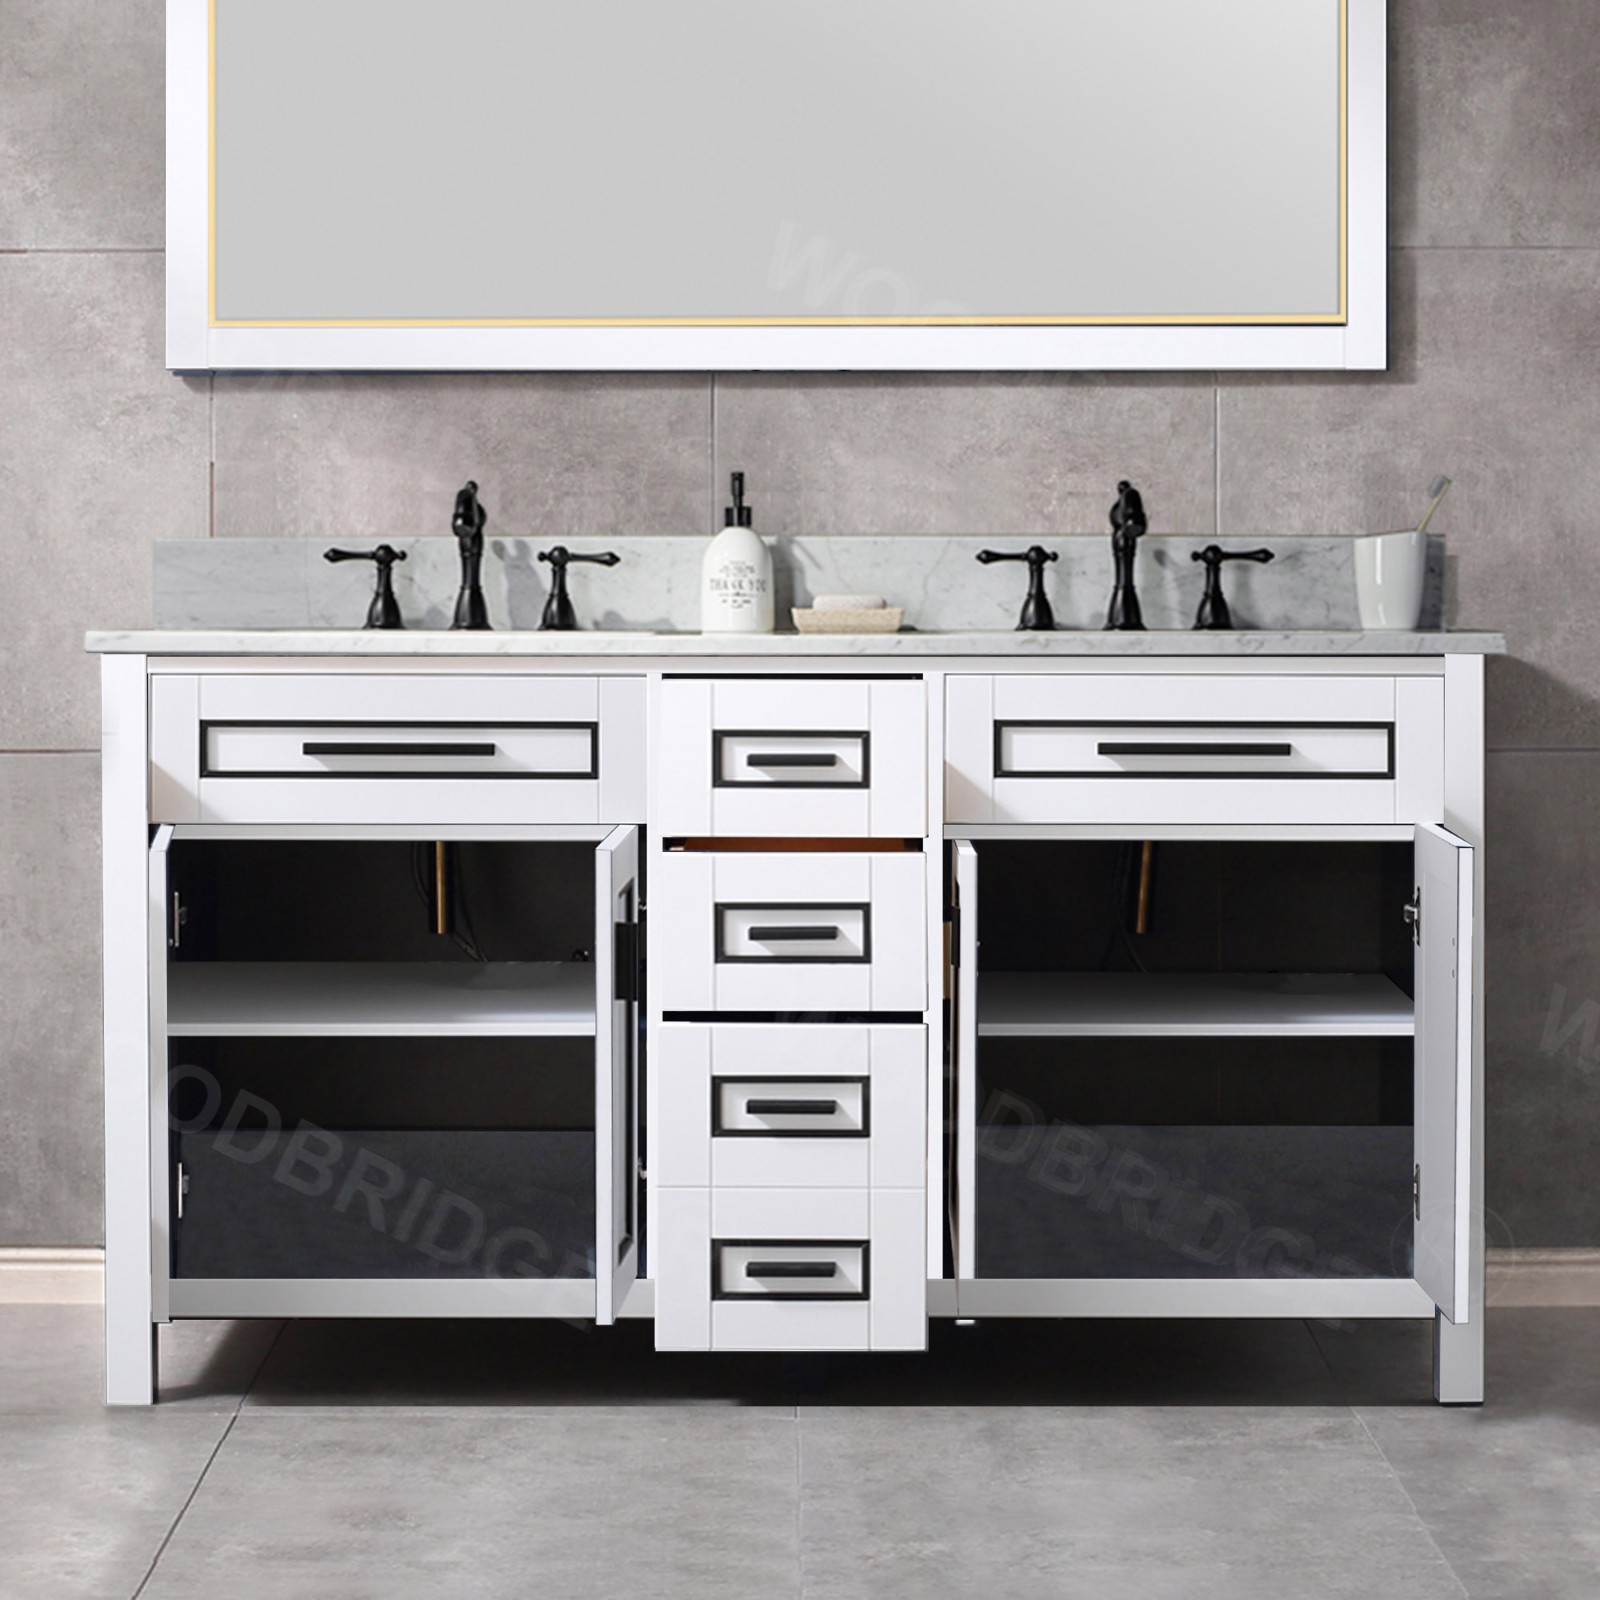  WOODBRIDGE Milan  61” Floor Mounted Single Basin Vanity Set with Solid Wood Cabinet in White, and Carrara White Marble Vanity Top with Pre-installed Undermount Rectangle Bathroom Sink in White, Pre-Drilled 3-Hole for 8-inch Widespread Faucet_4611